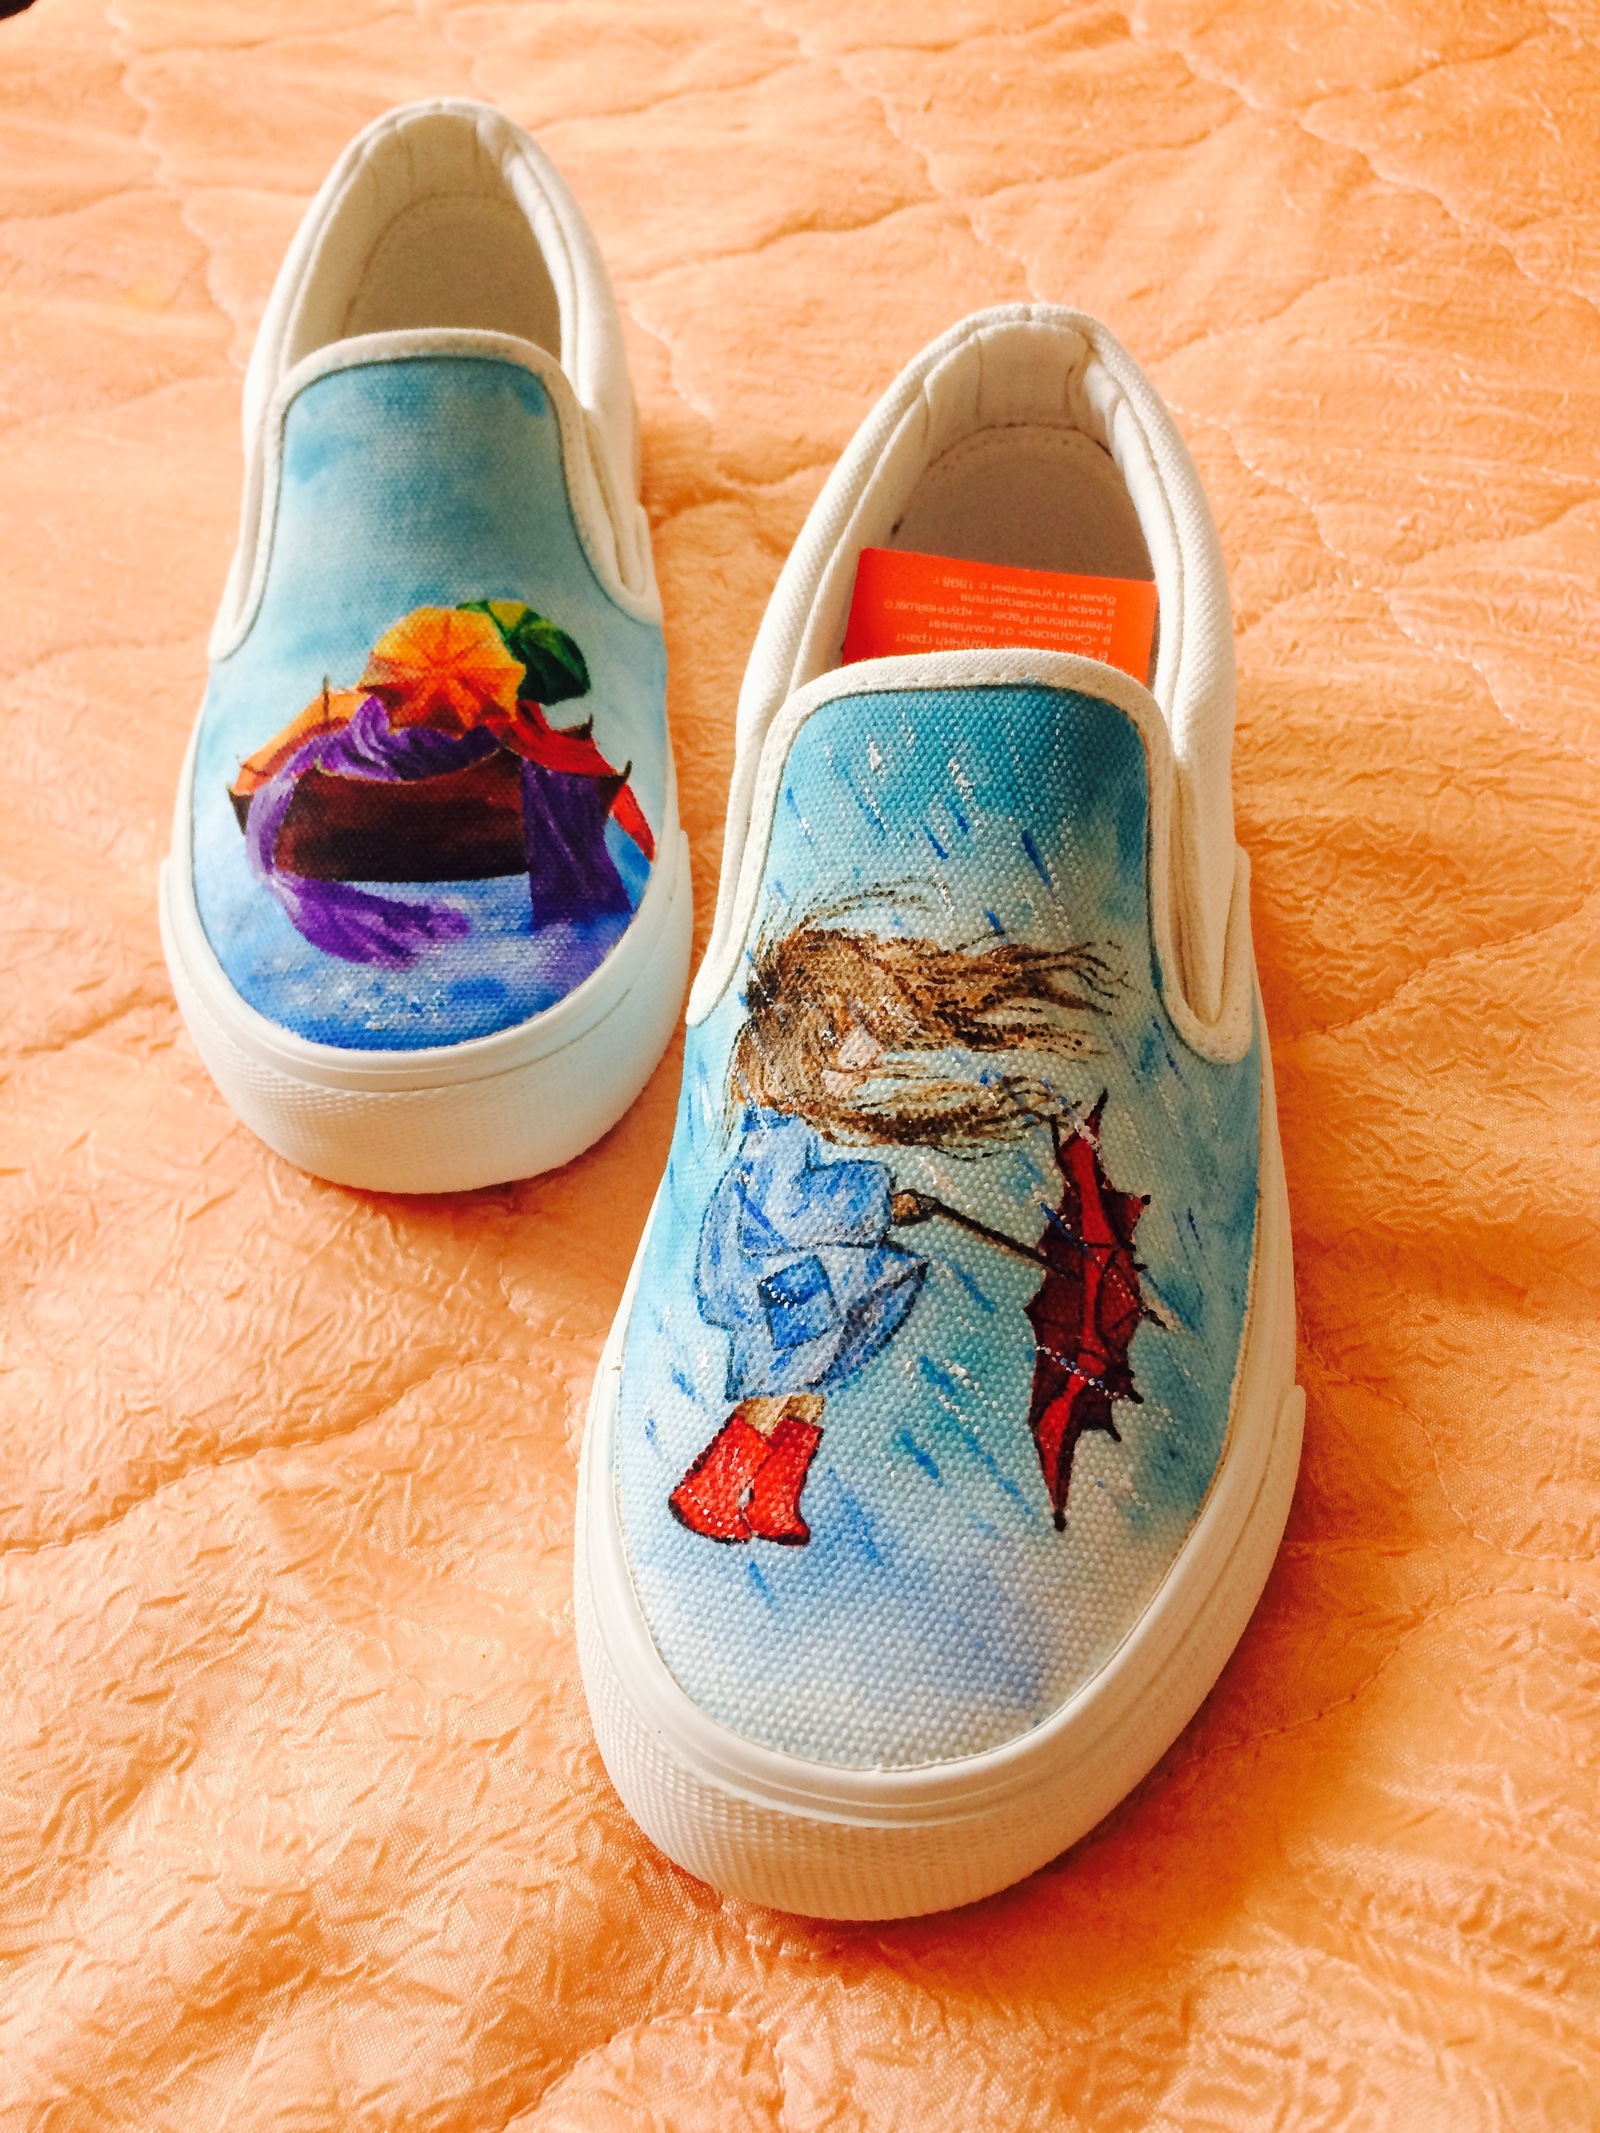 Slips to match our weather) Summer decided to bypass our region this year, rains and puddles, hey! Hello Summer! - My, Shoe painting, Painting on fabric